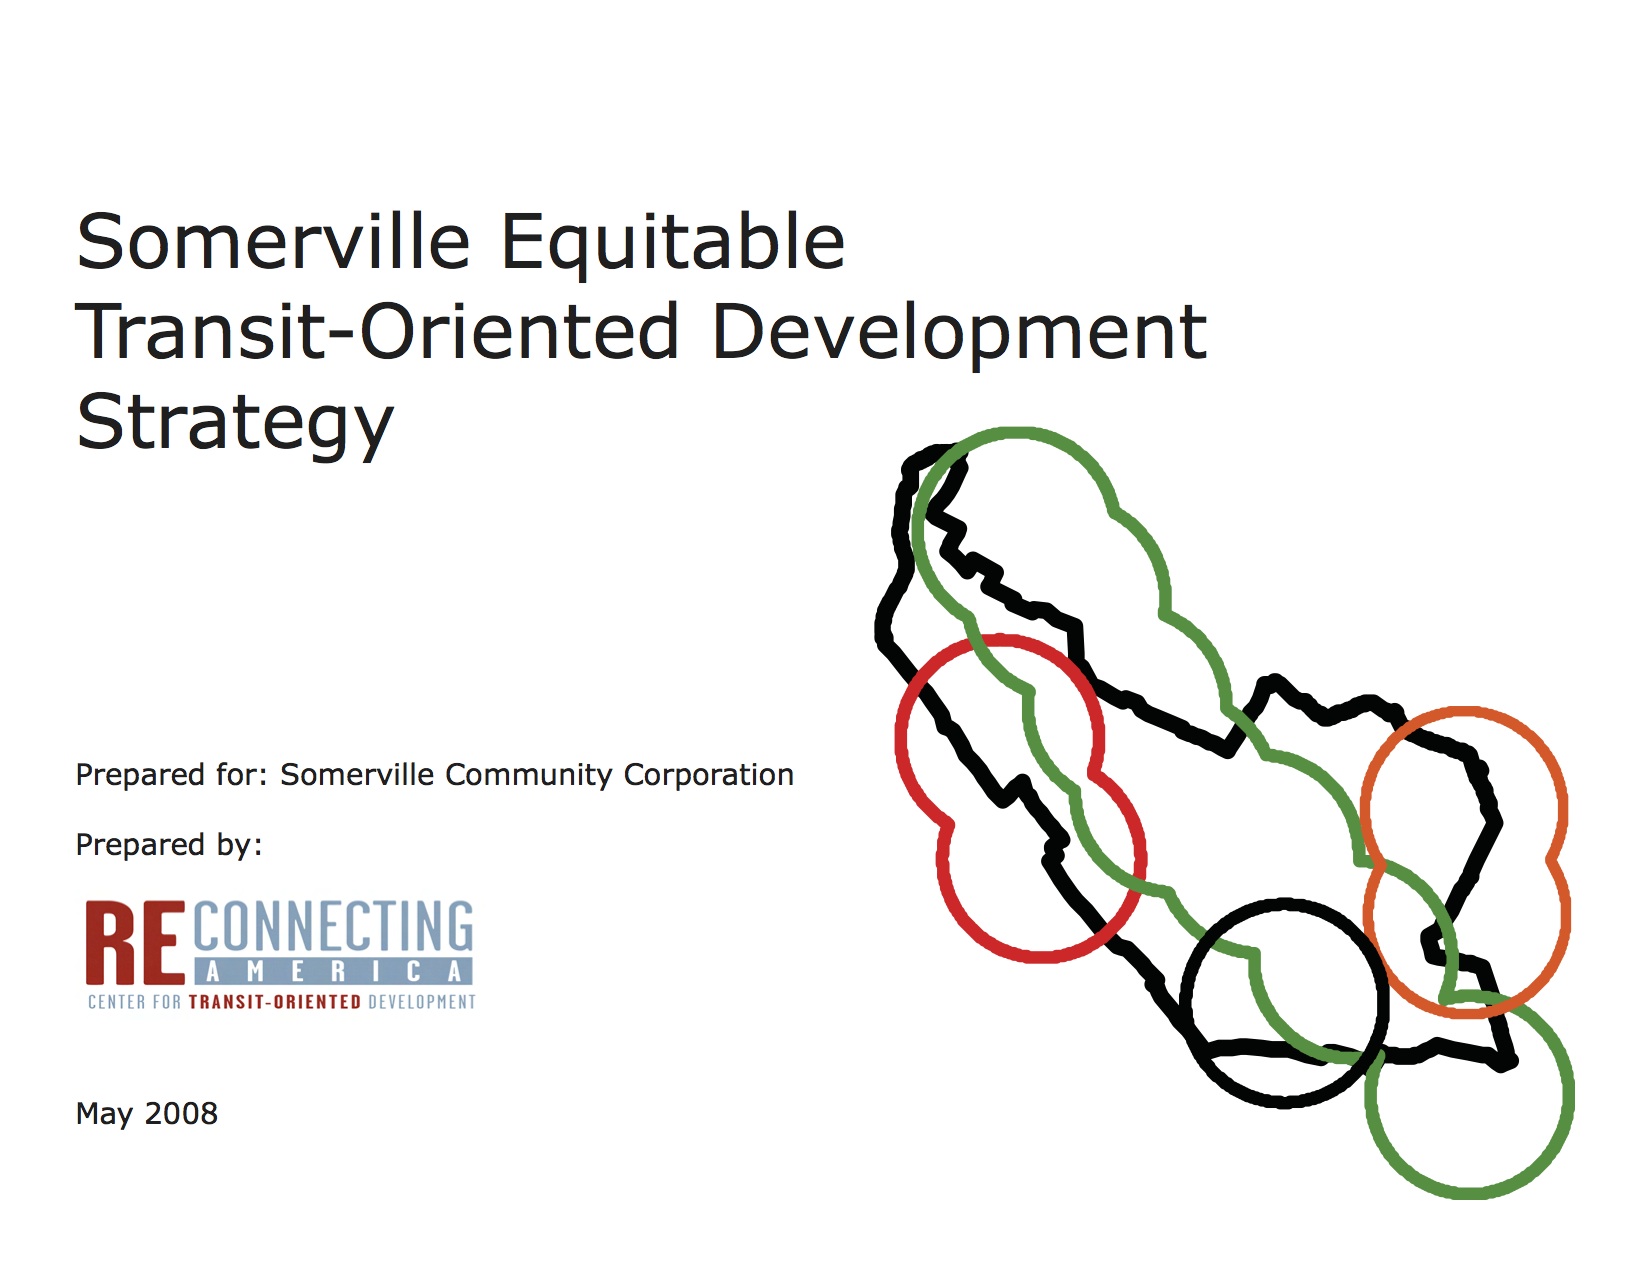 Somerville Equitable Transit-Oriented Development Strategy